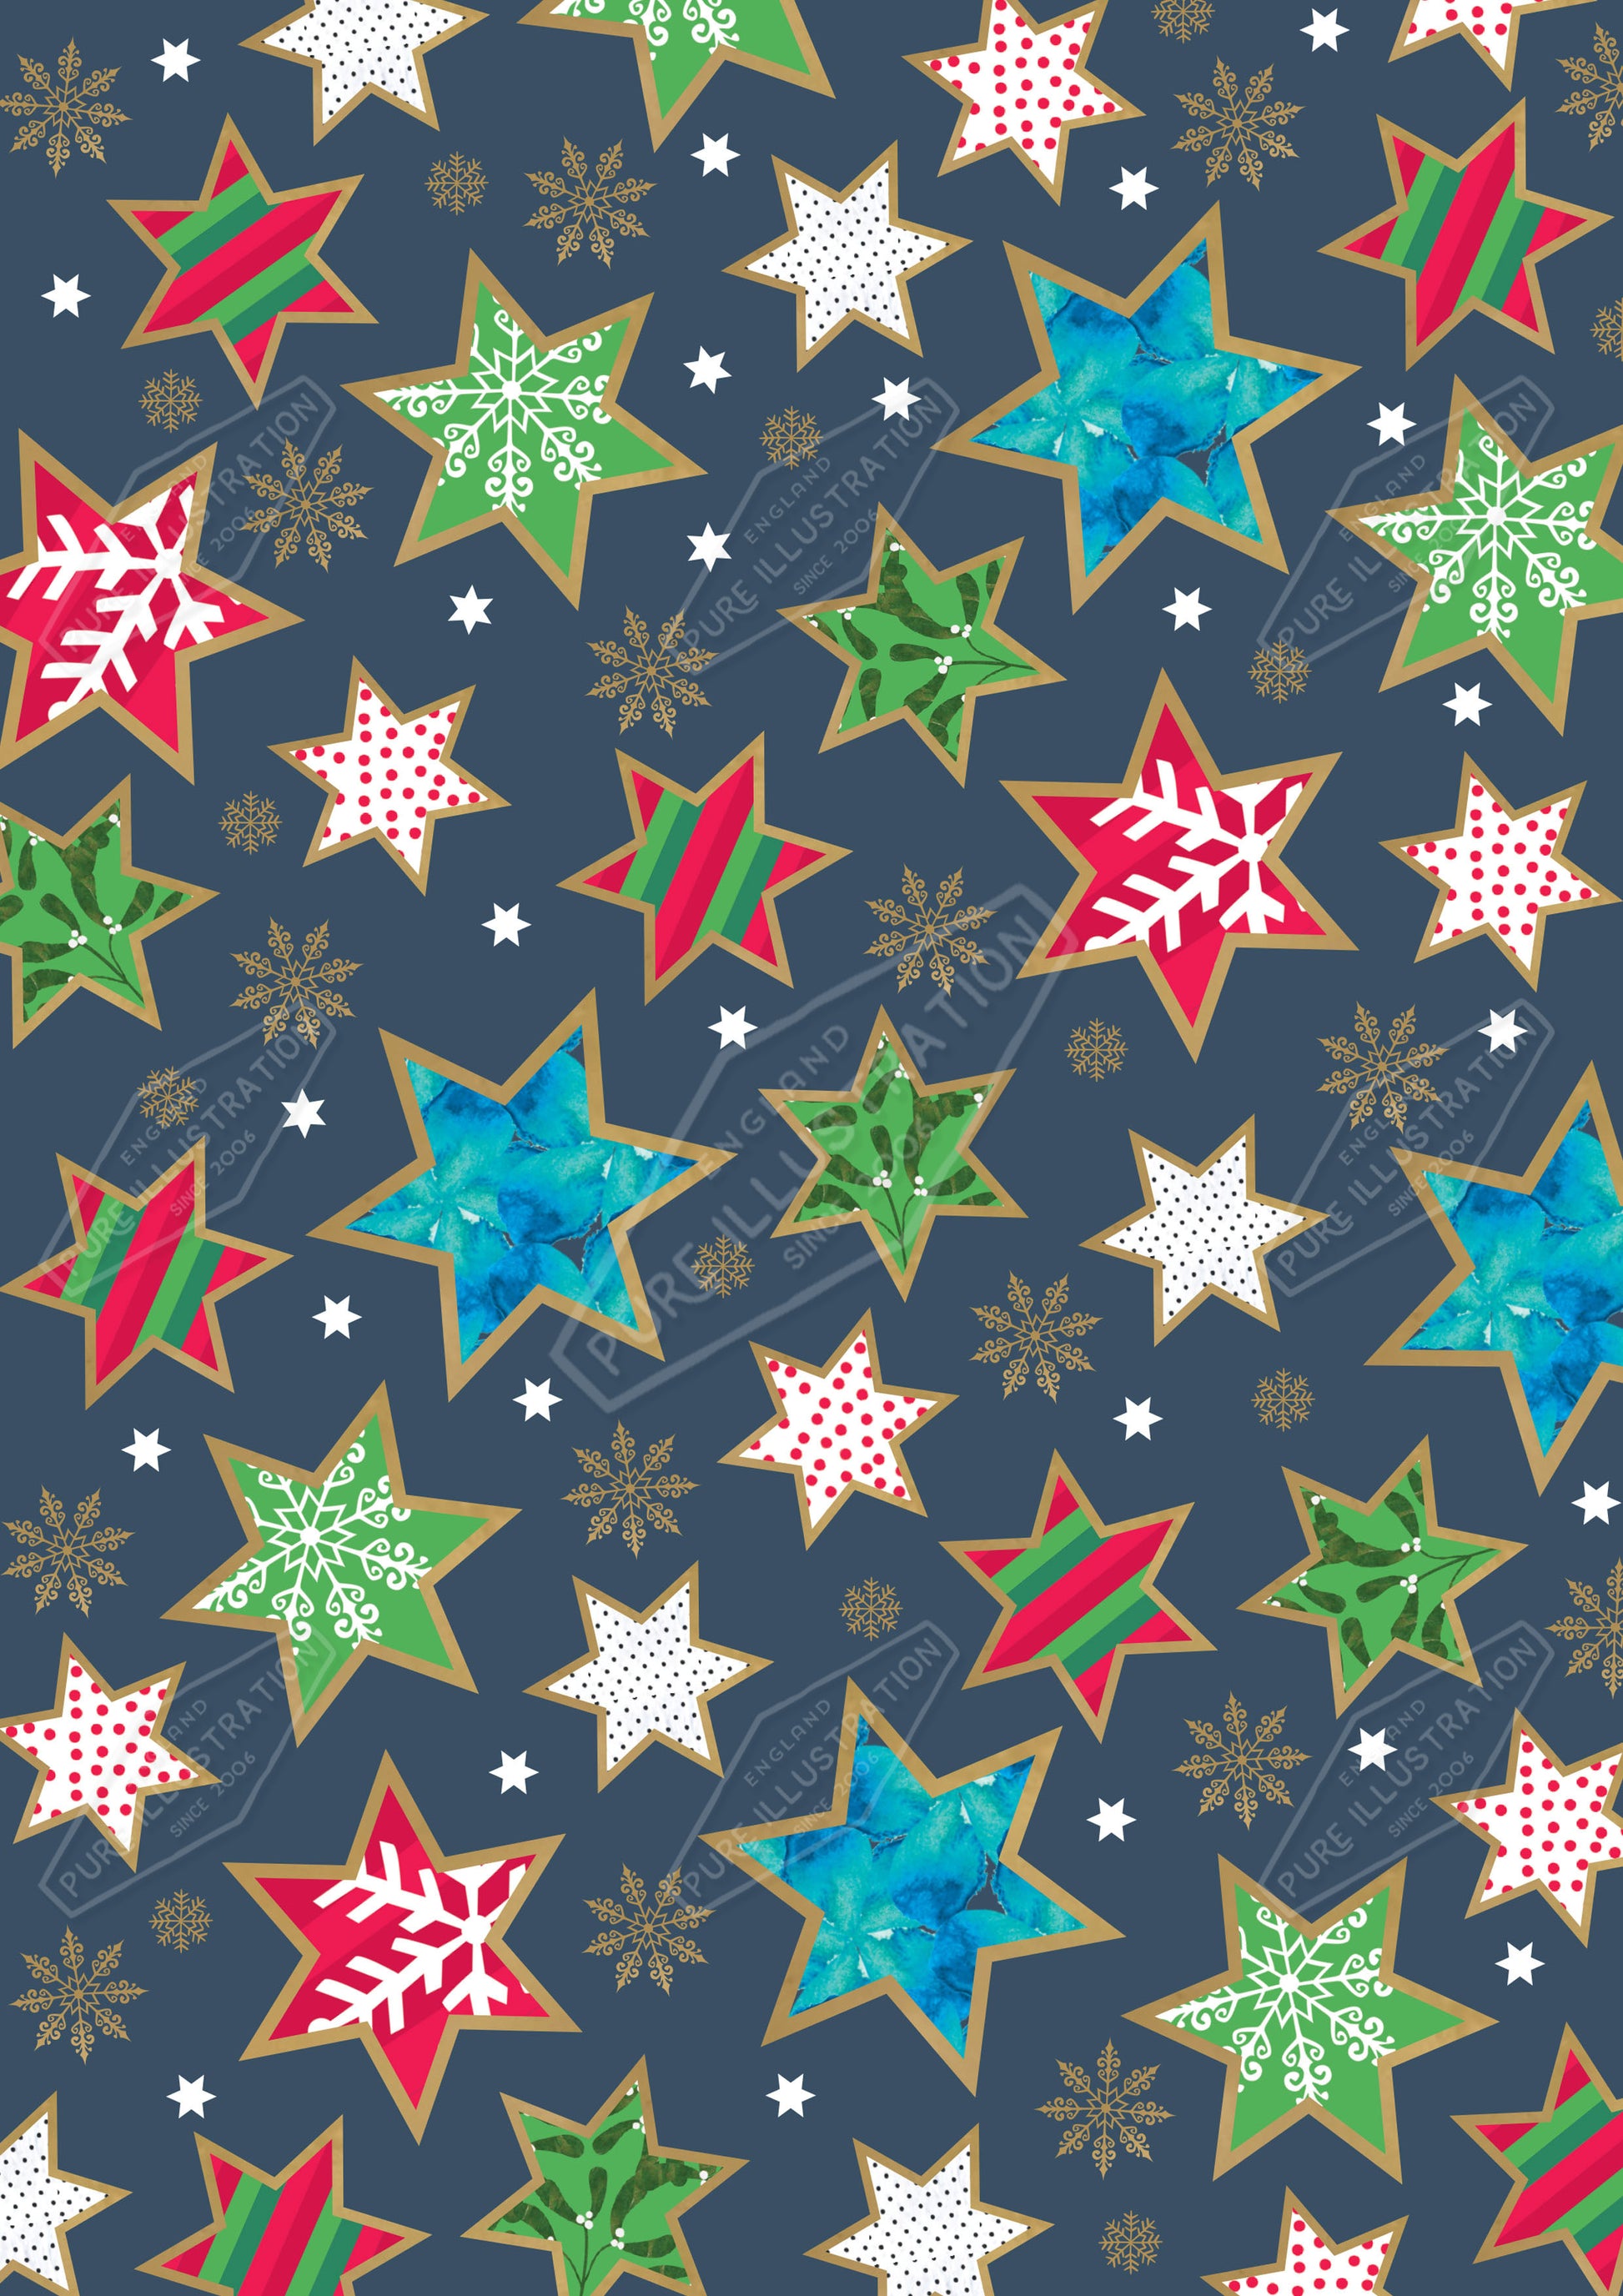 00035071IMC- Isla McDonald is represented by Pure Art Licensing Agency - Christmas Pattern Design